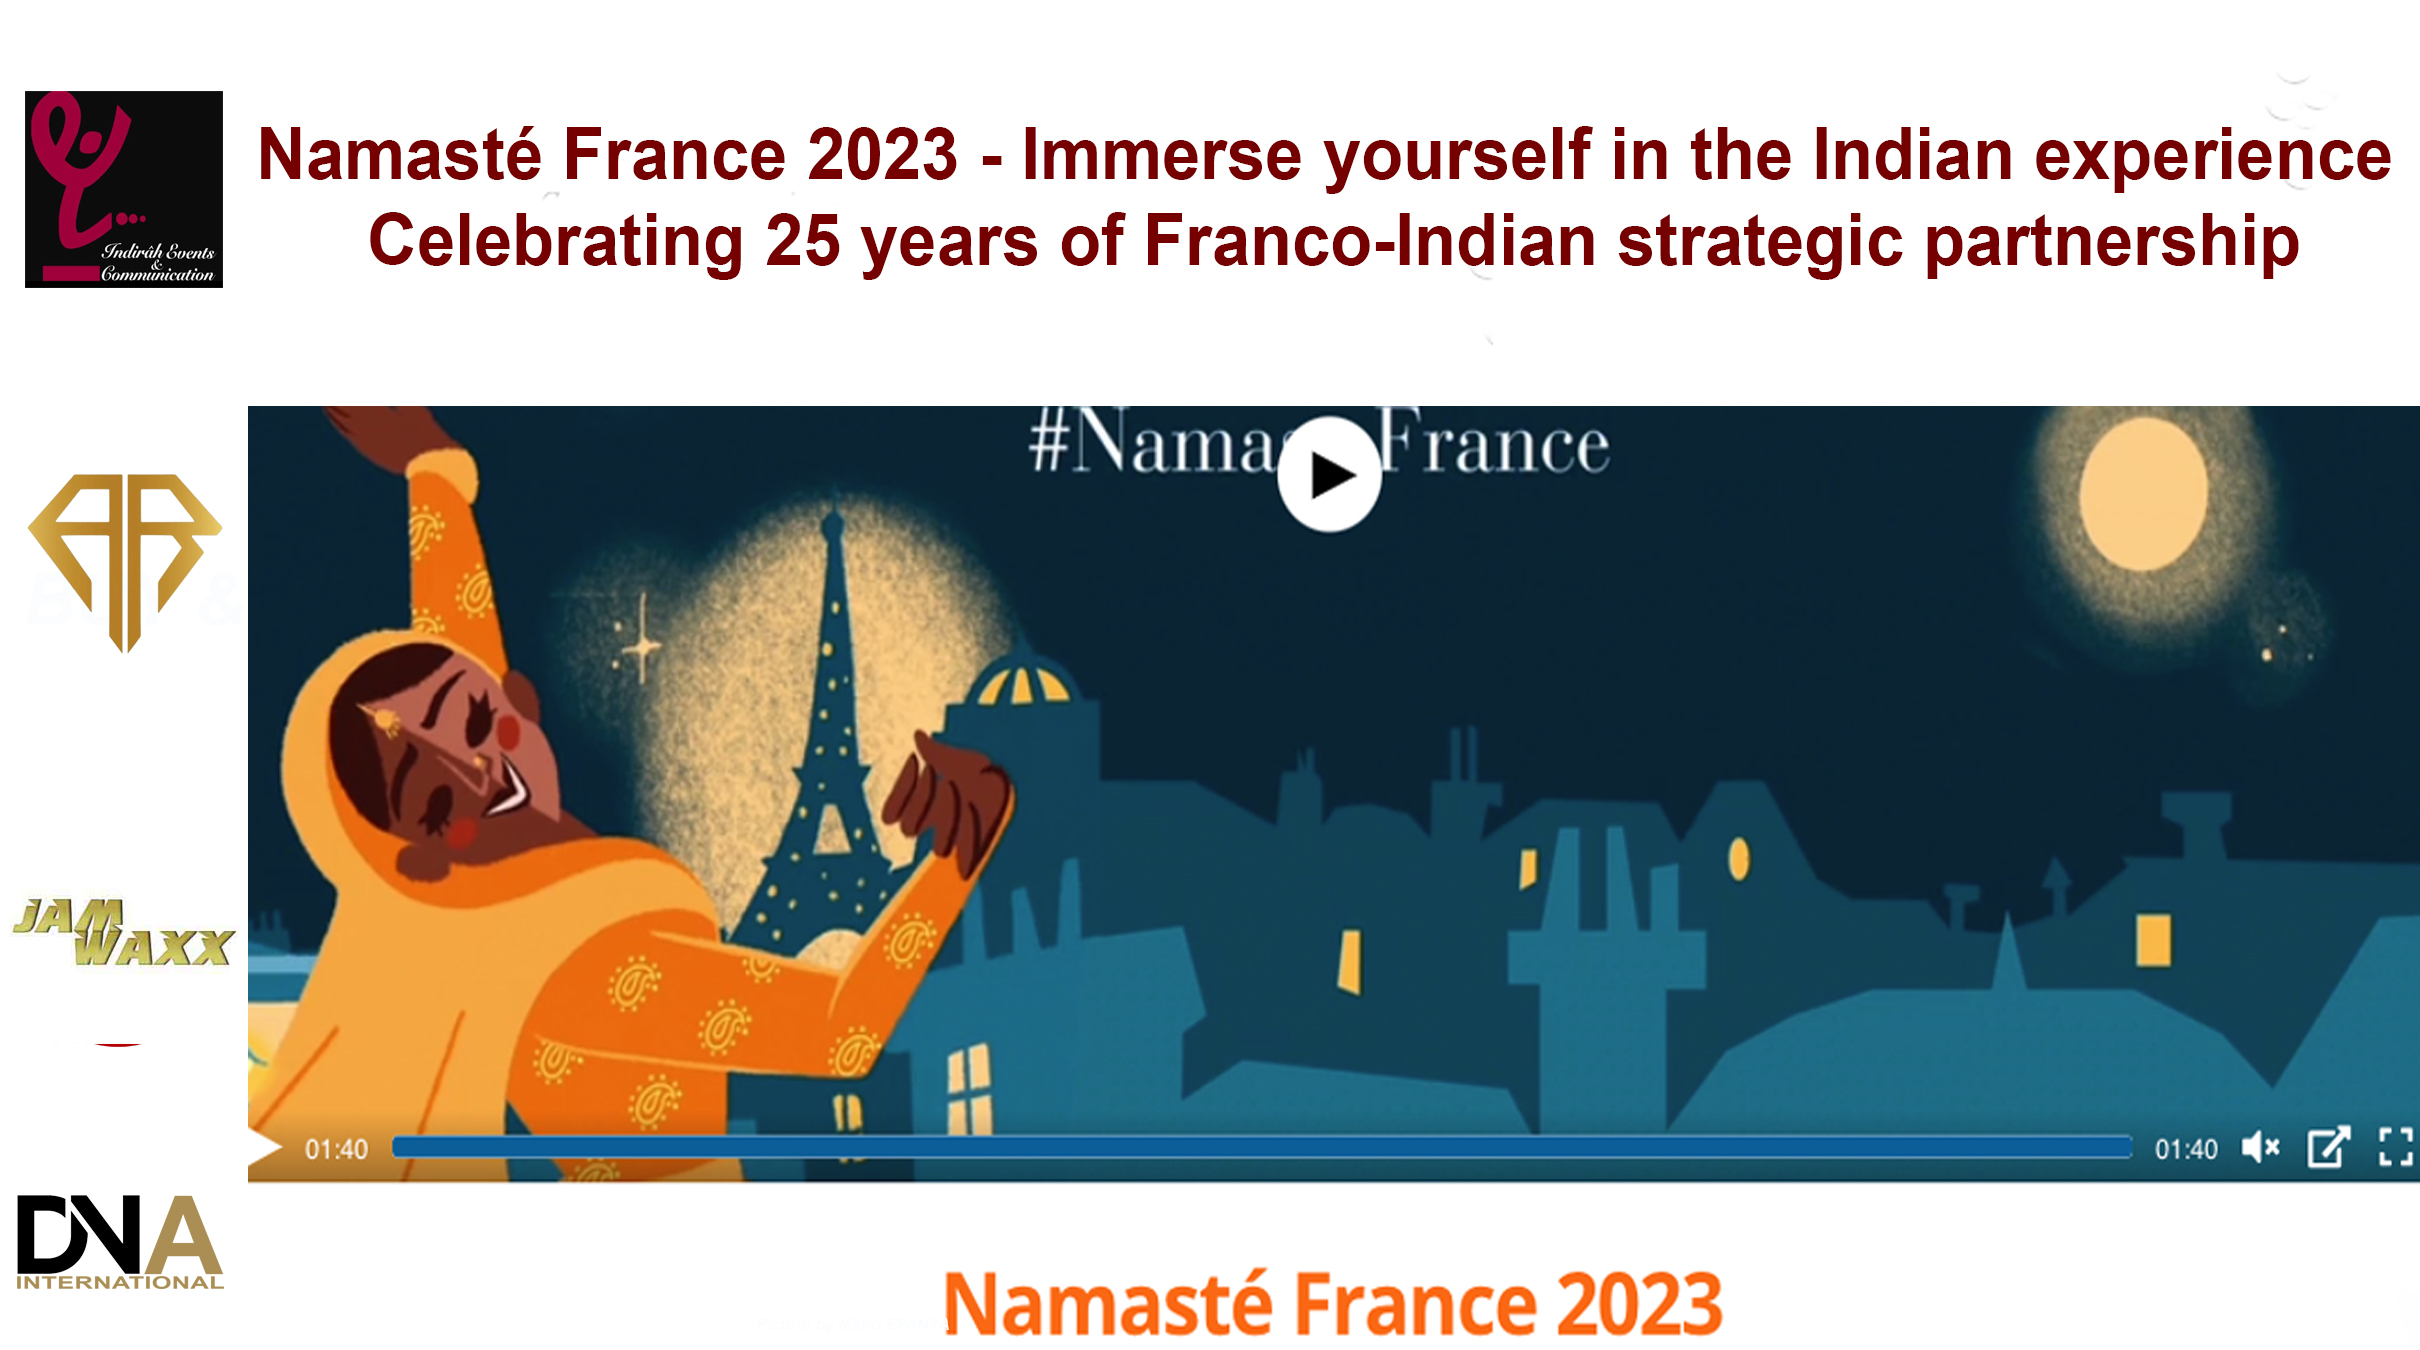 AFRICA-VOGUE-COVER-Namasté-France-2023-Immerse-yourself-in-the-Indian-experience-Celebrating-25-years-of-Franco-Indian-strategic-partnership-DN-AFRICA-Media-Partner